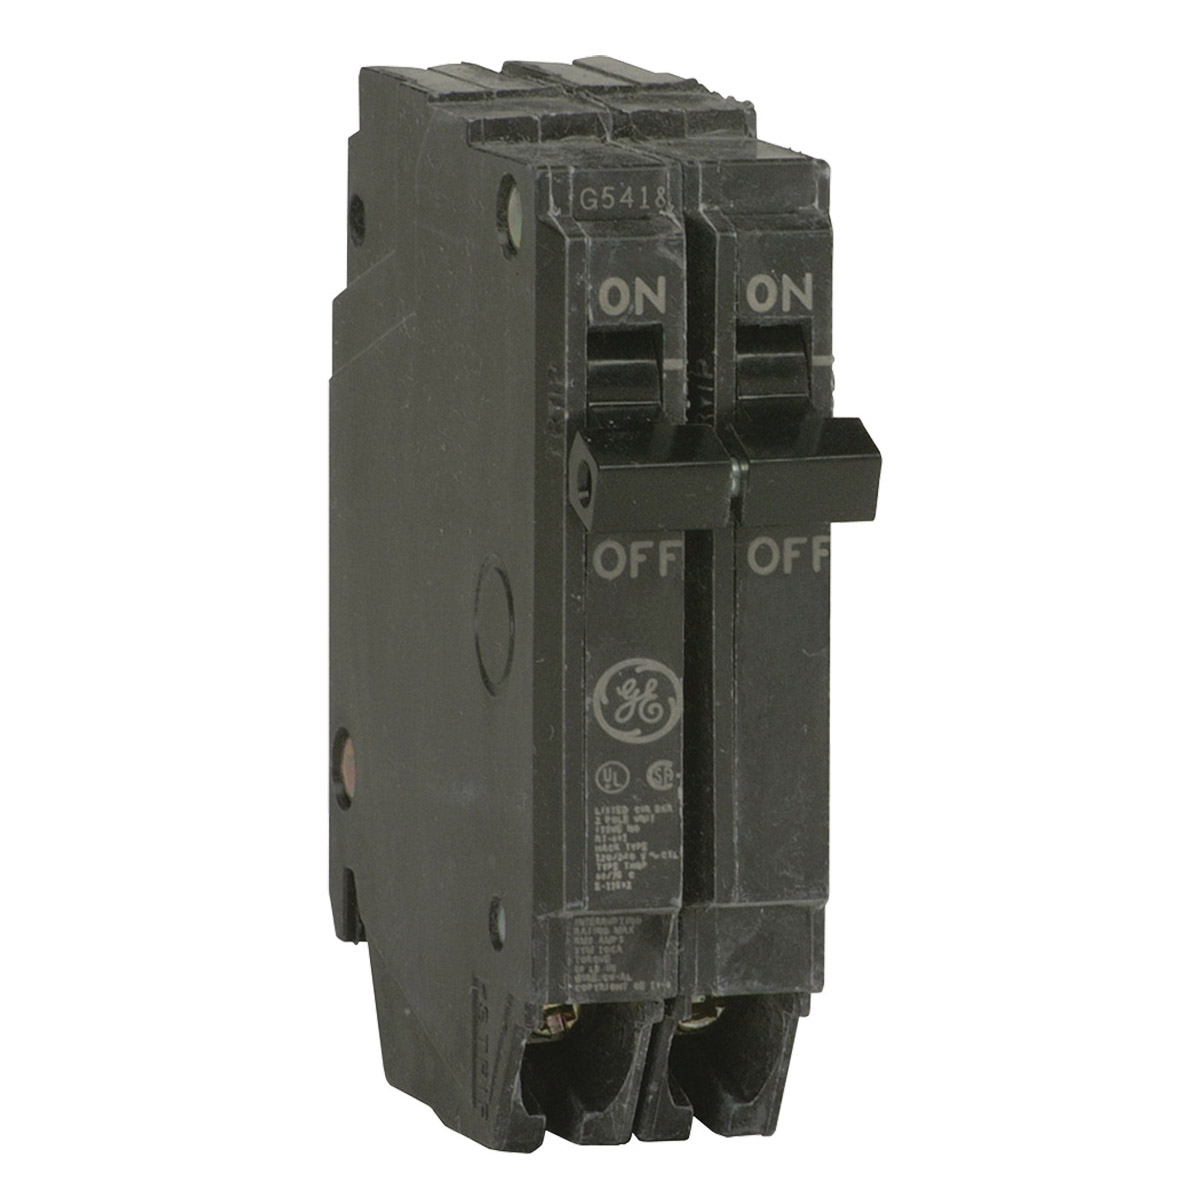 THQP230 Feeder Circuit Breaker, Type THQP, 30 A, 2 -Pole, 120/240 V, Plug Mounting